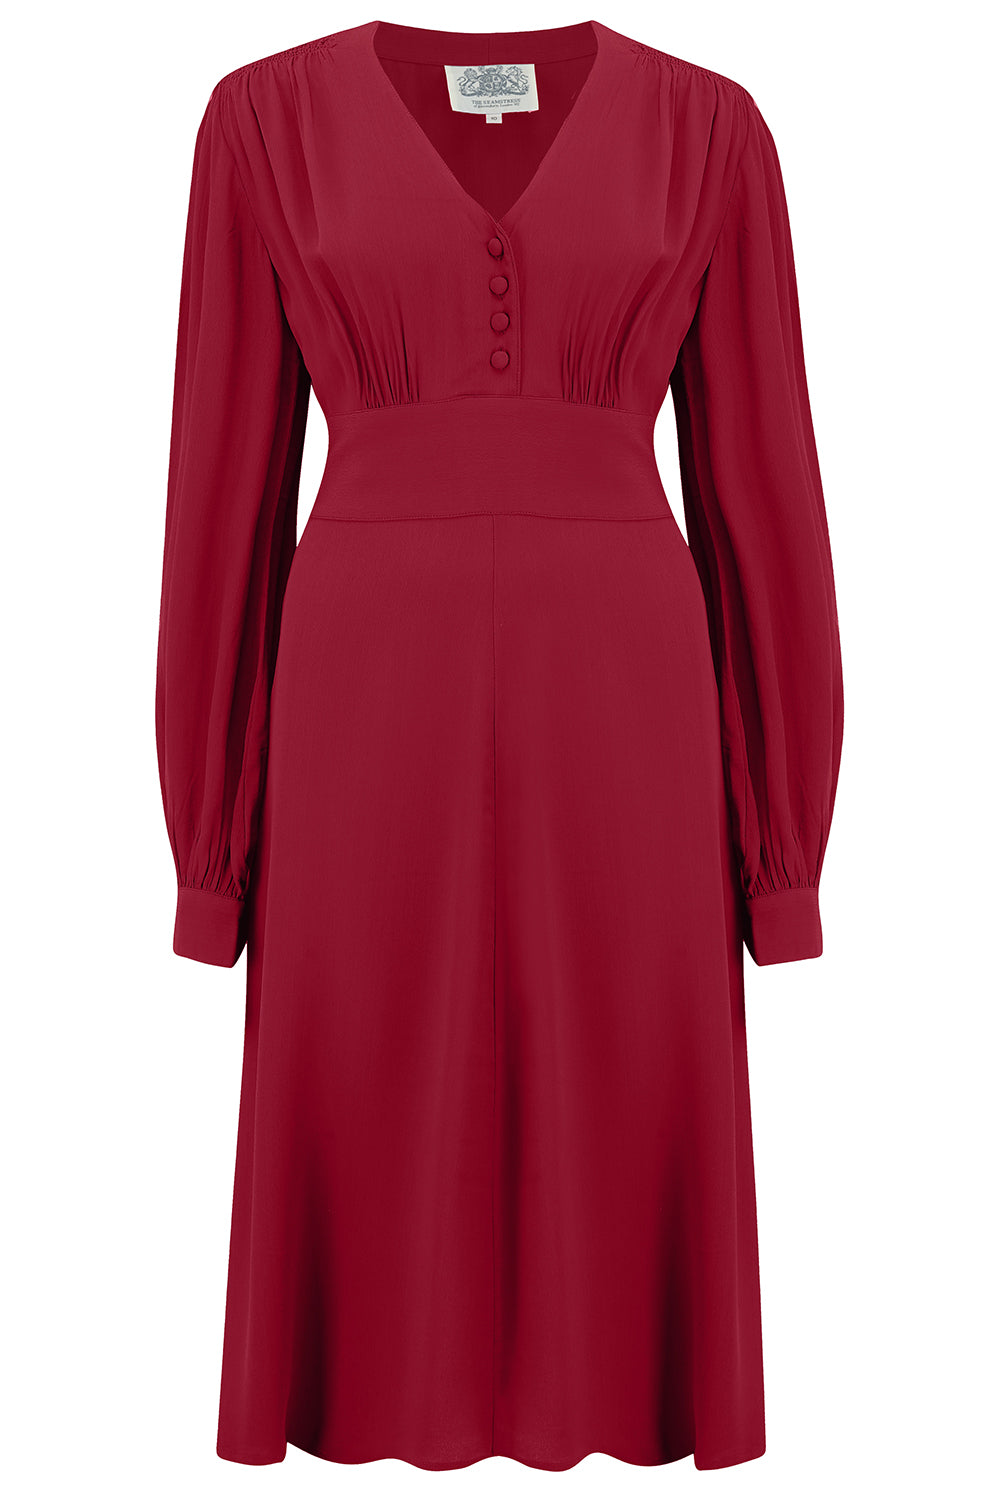 "Ava" Dress in Wine Vintage, Classic 1940's Style Long Sleeve Dress